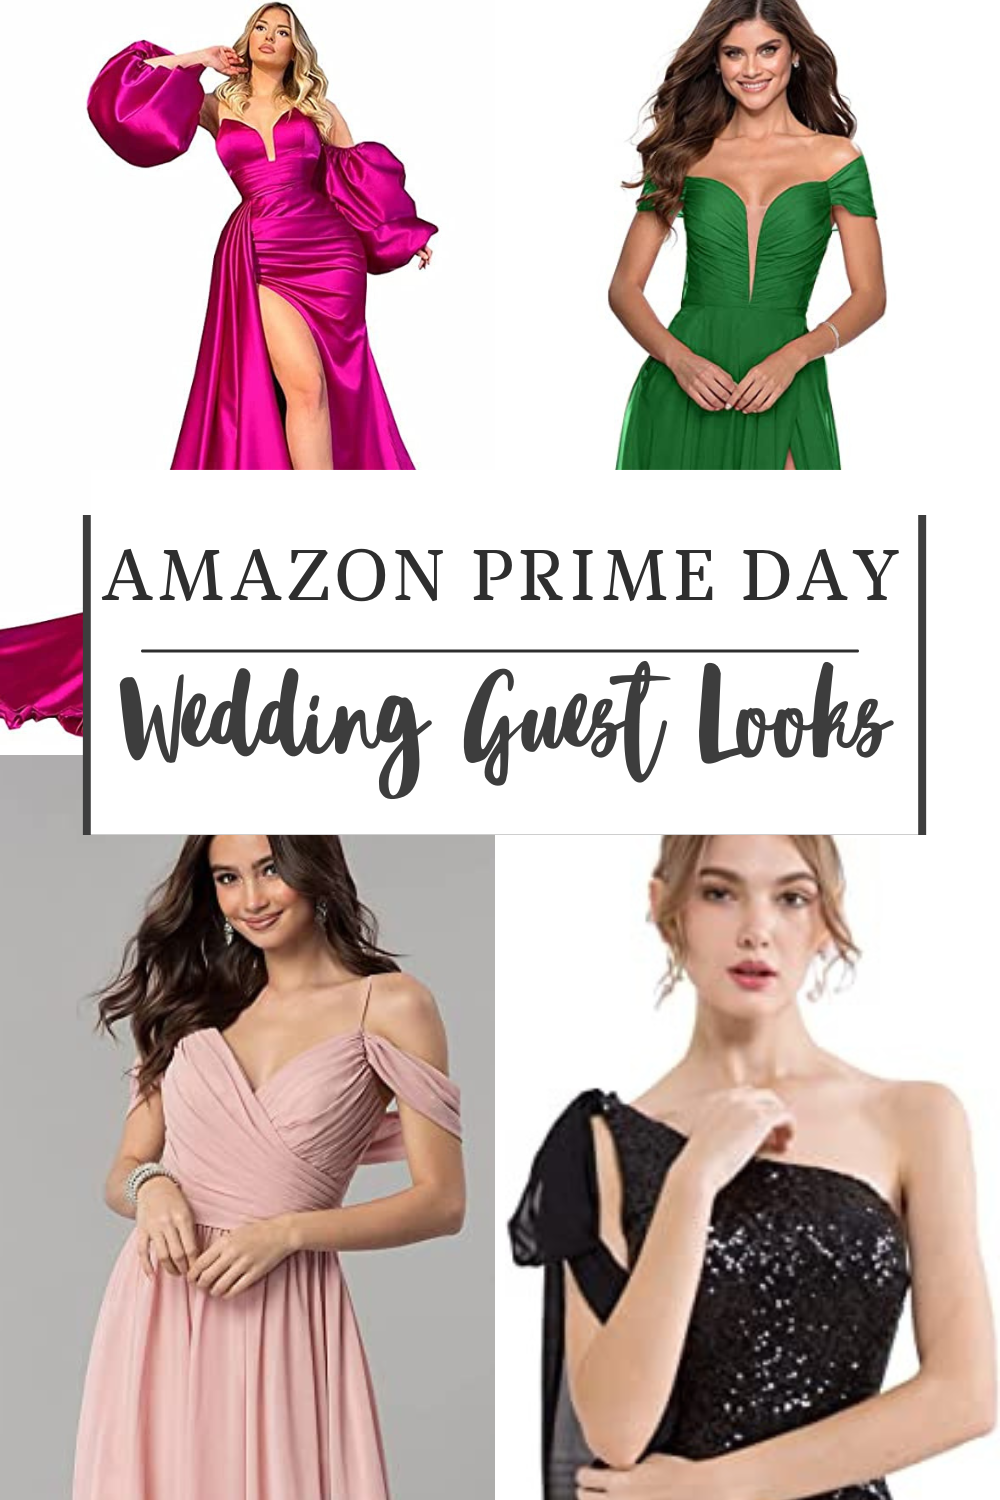 blog for amazon prime day wedding guest looks